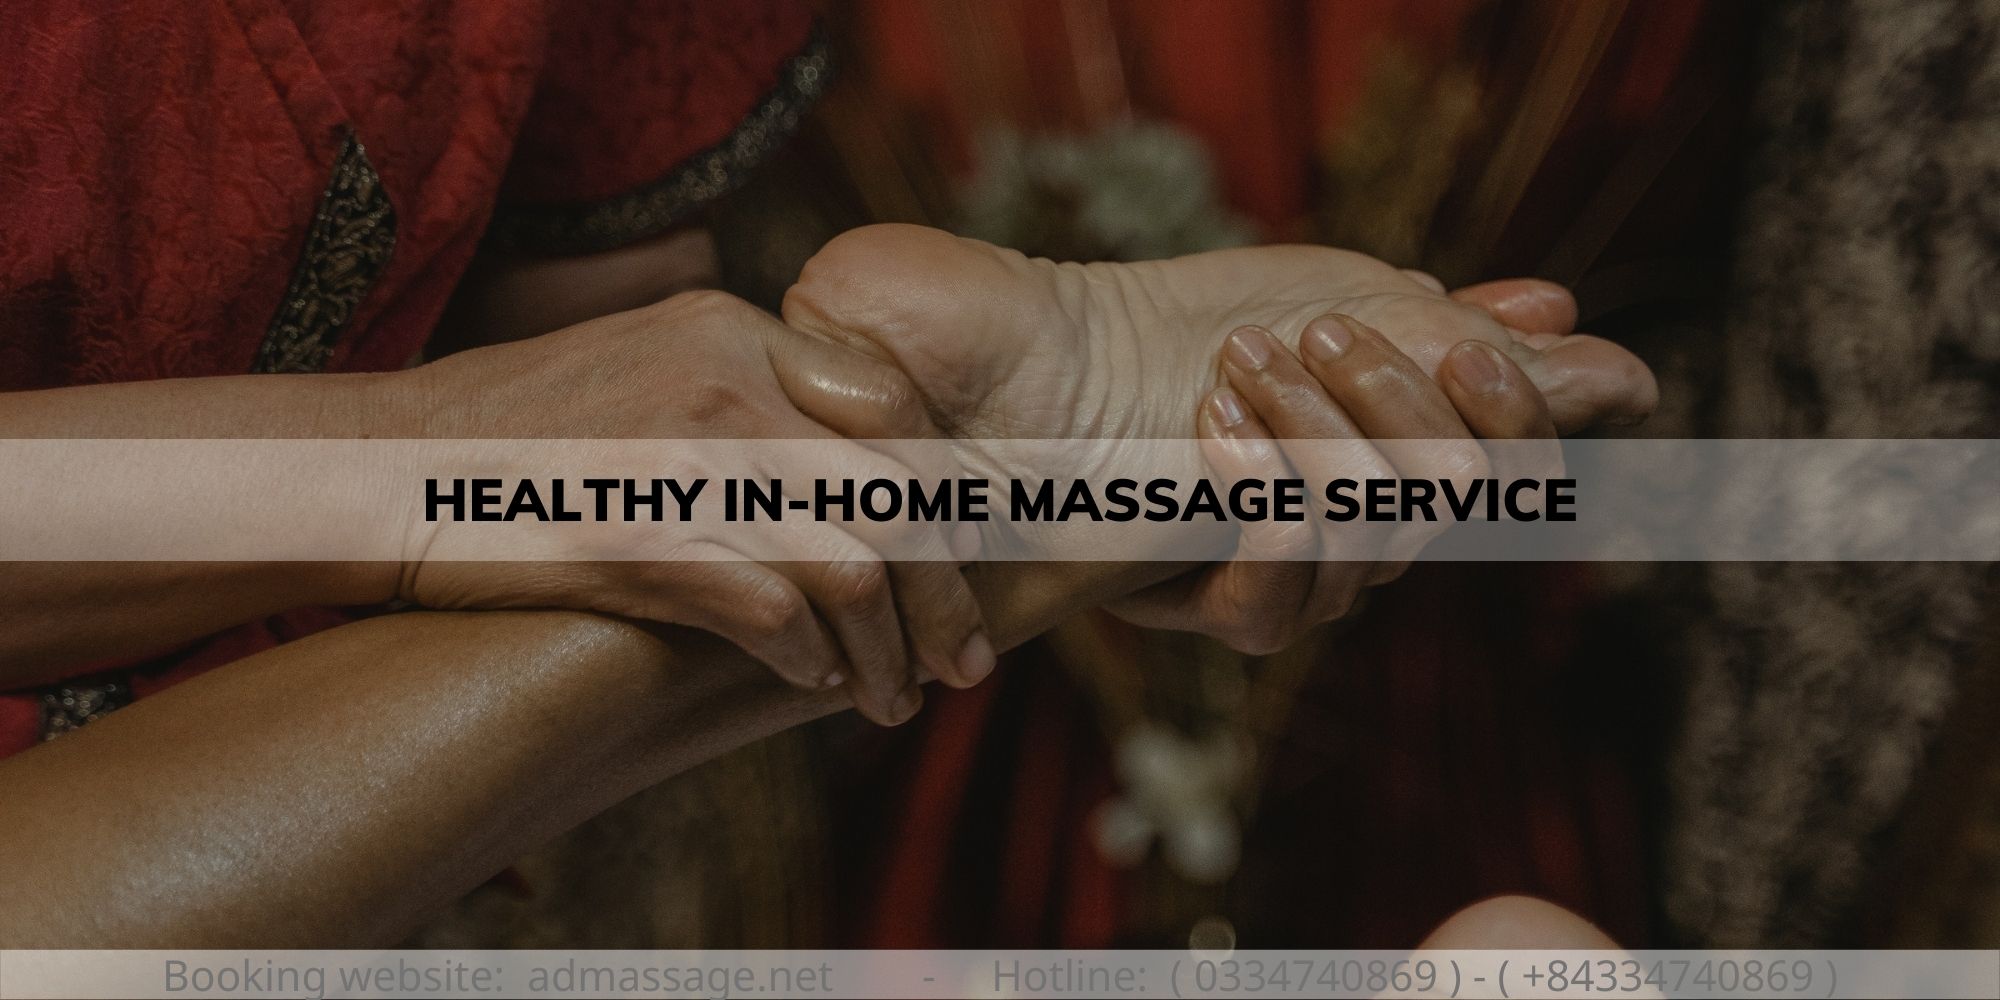 HEALTHY IN-HOME MASSAGE SERVICE